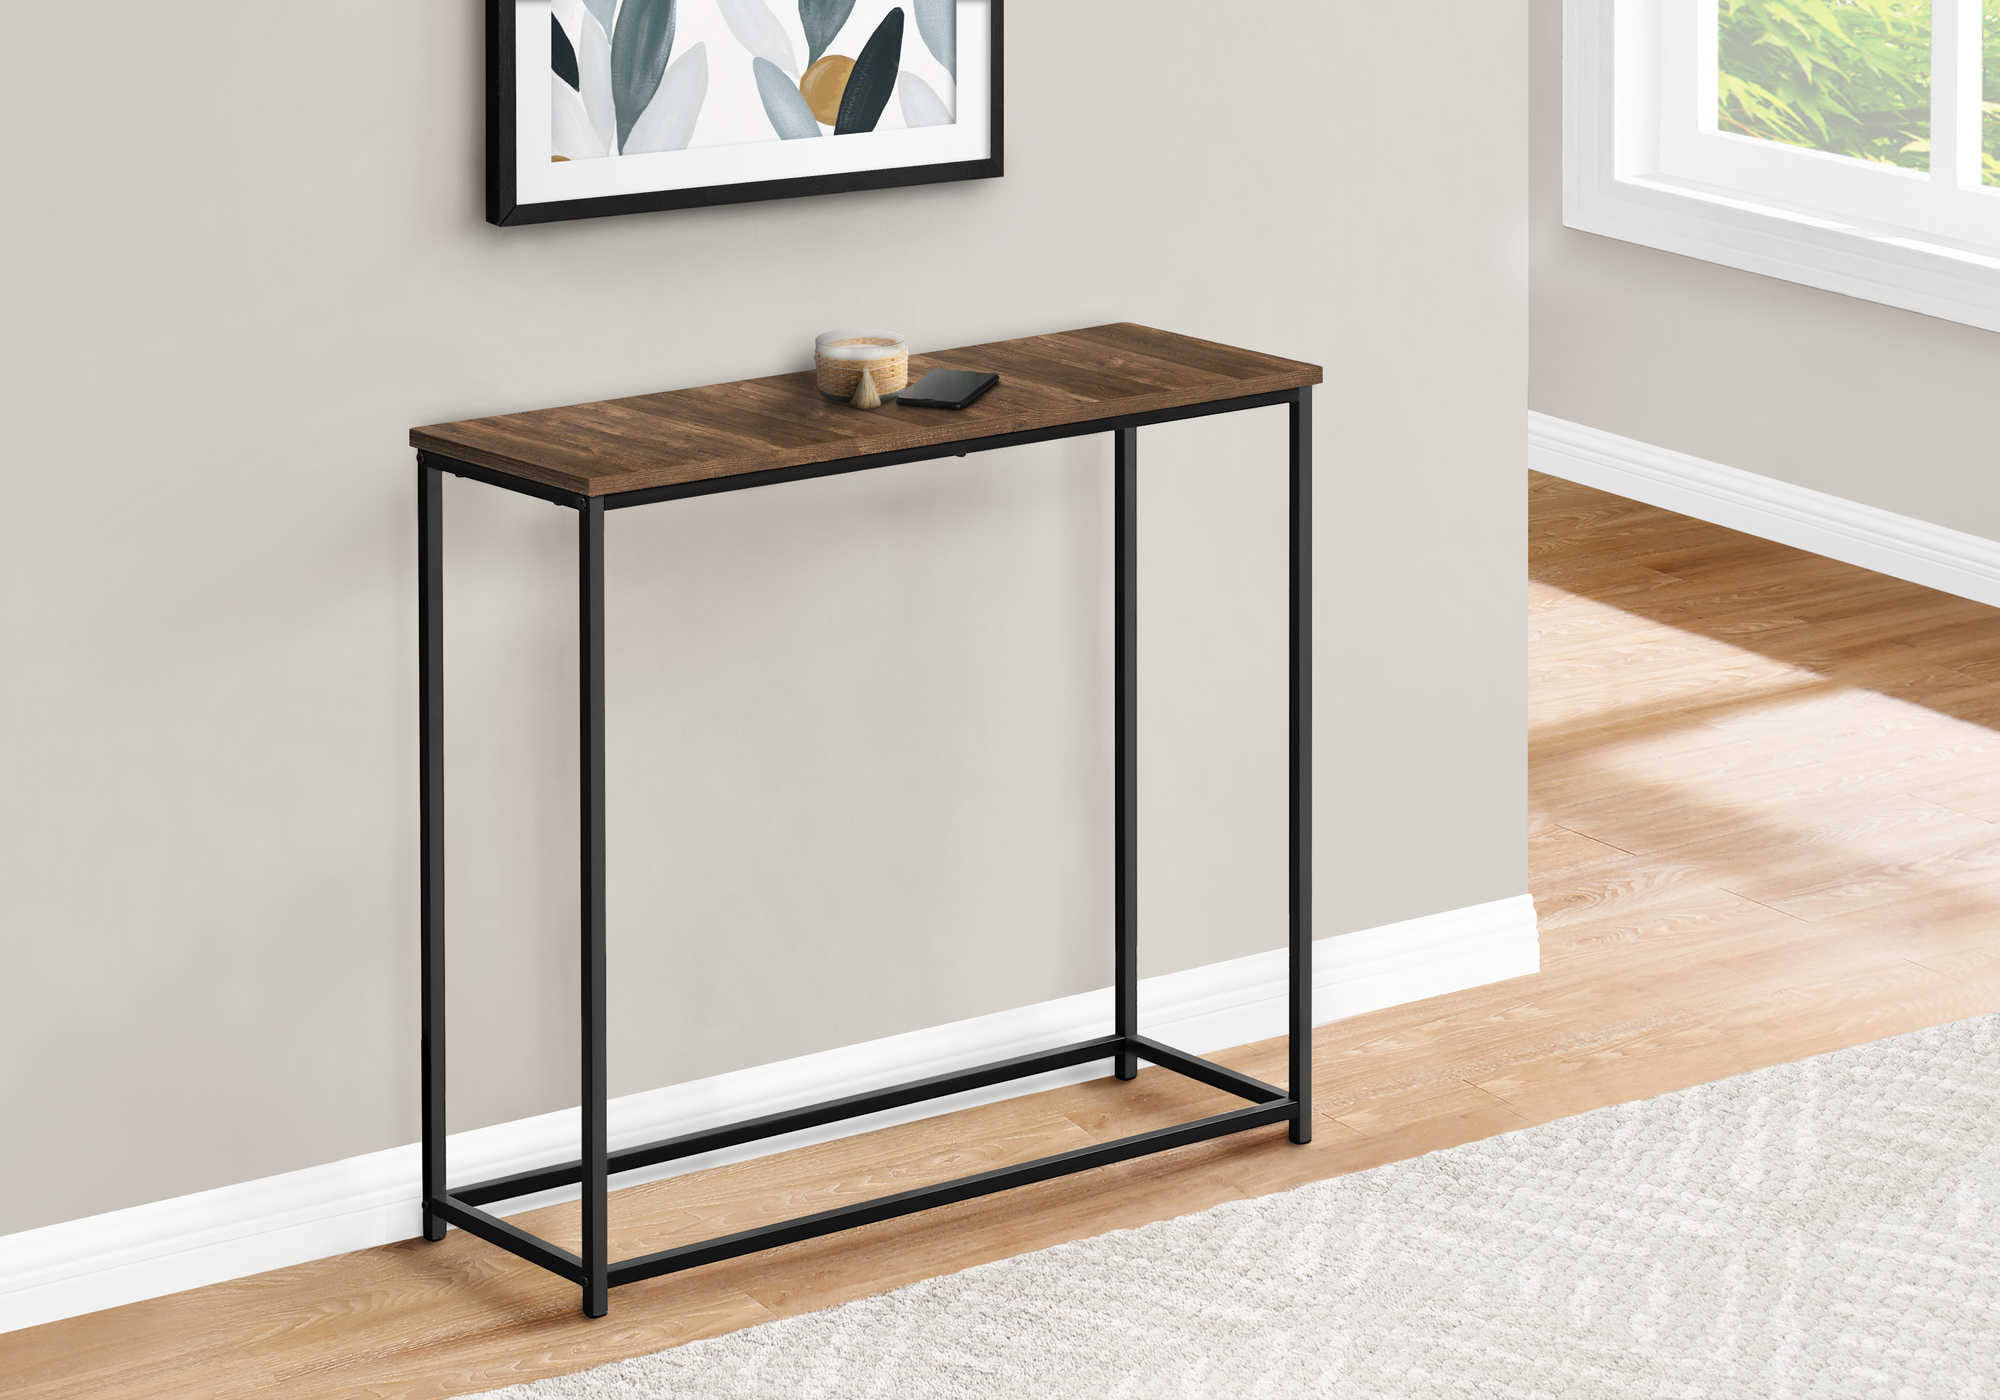 BEDROOM ACCENT CONSOLE TABLE - 32"L / BROWN RECLAIMED / BLACK CONSOLE